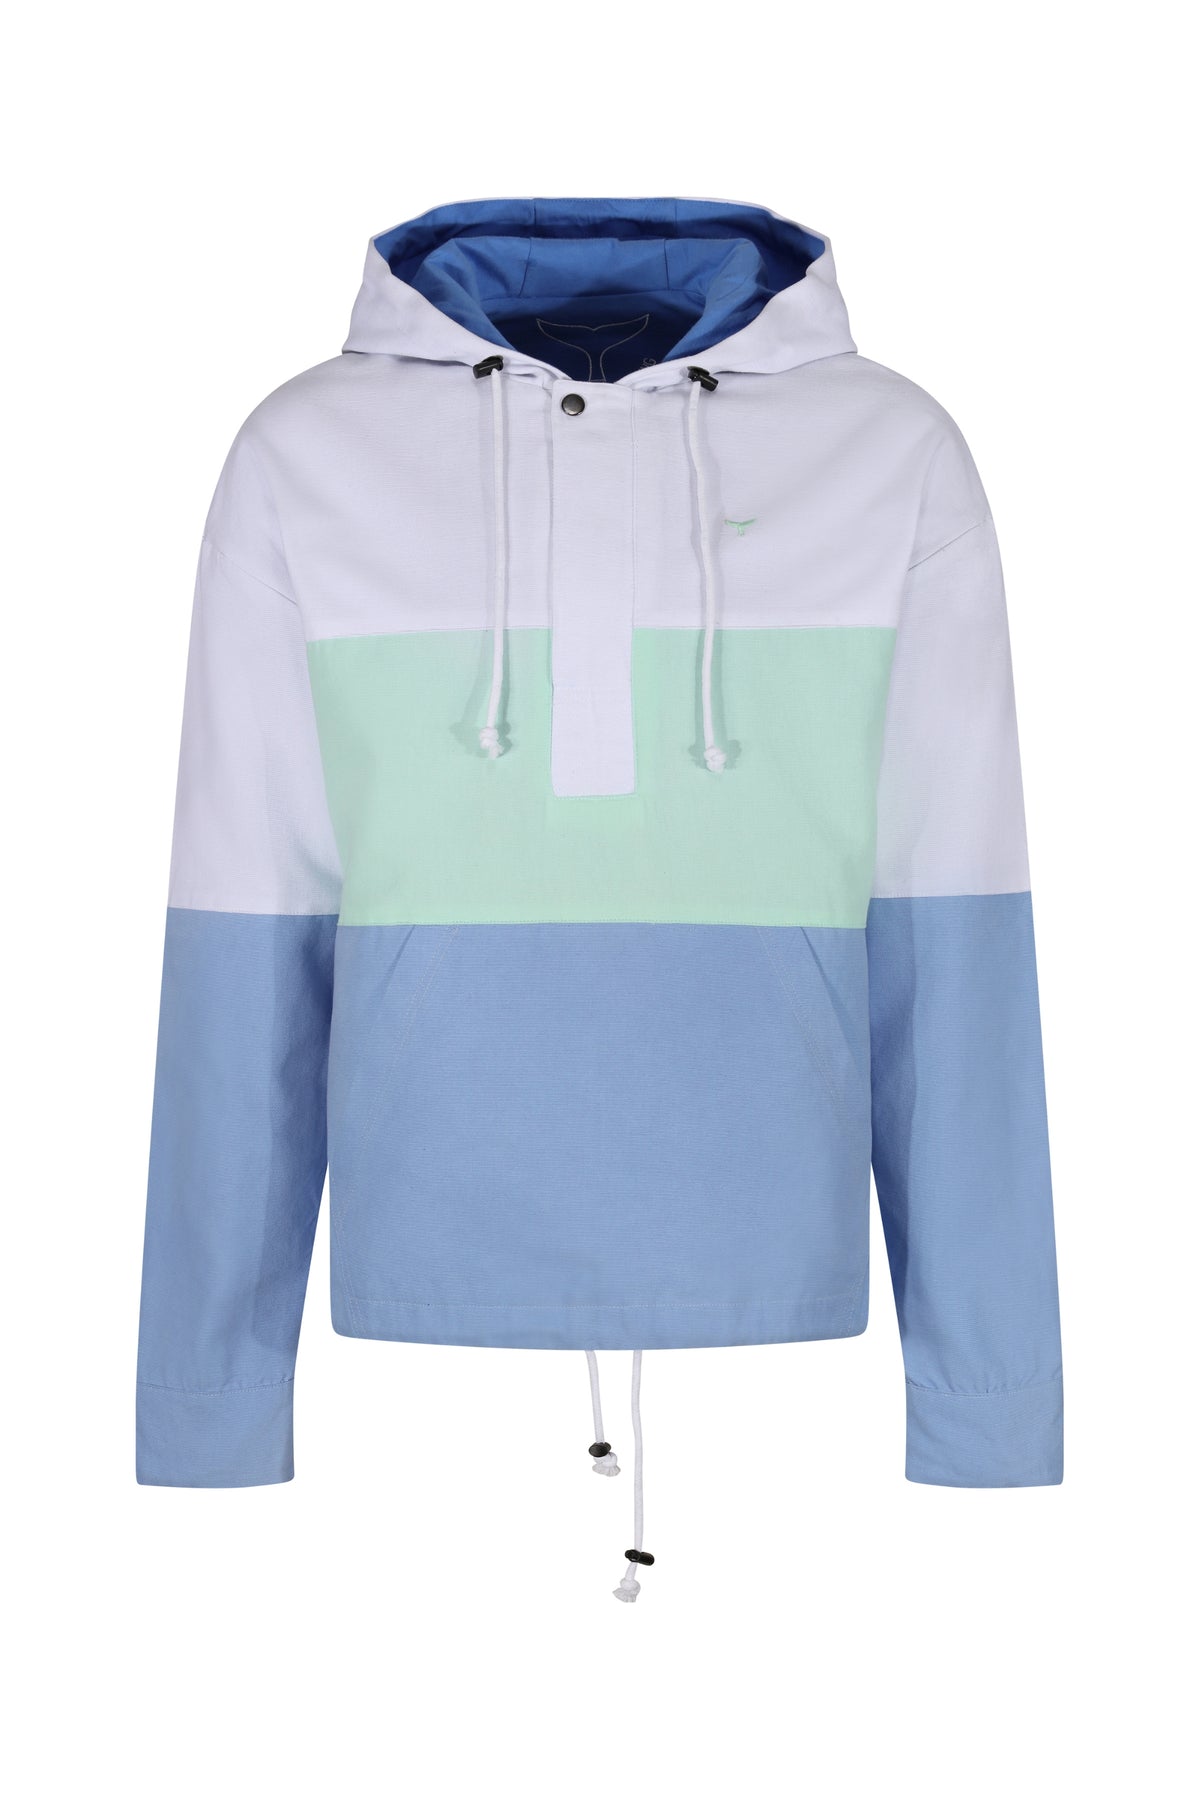 Cornwall Unisex Windbreaker - White - Whale Of A Time Clothing